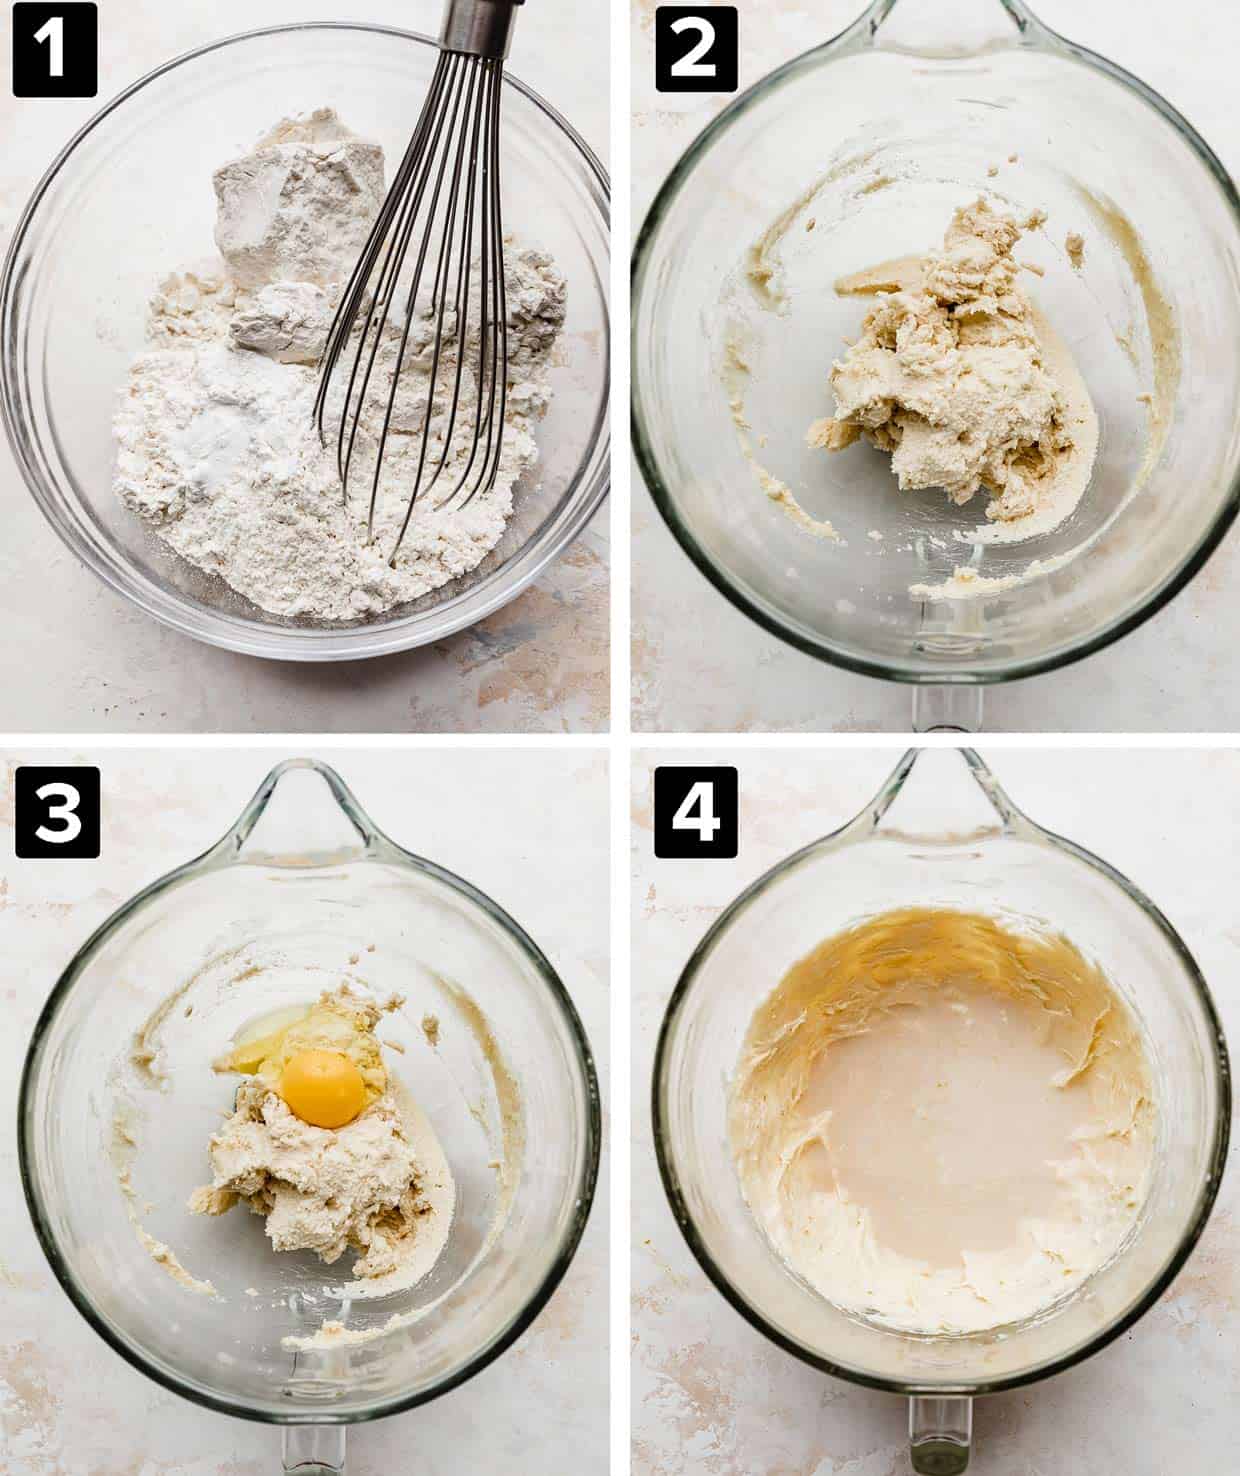 Four photos showing how to make Cinnamon Chocolate Chip Coffee Cake batter.